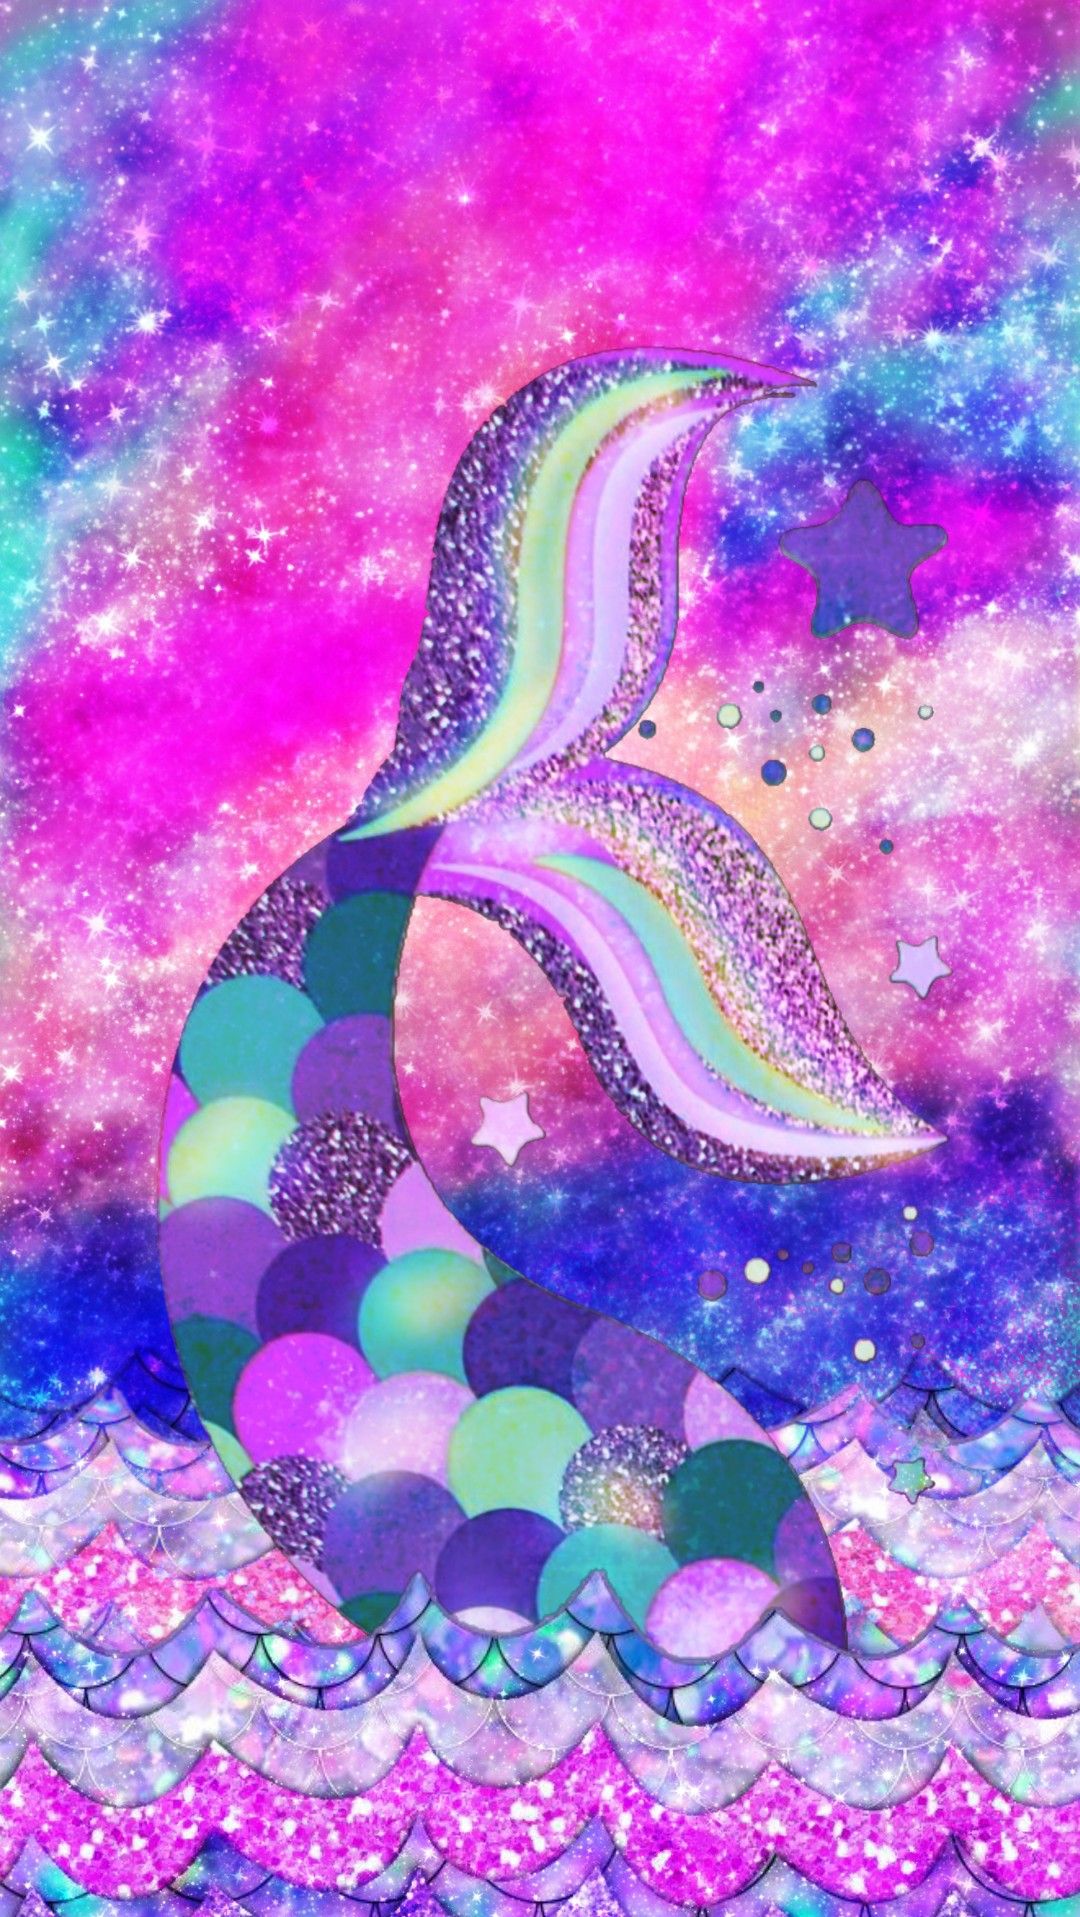 Galaxy Mermaid Tale Made By Me Purple Sparkly Wallpaper